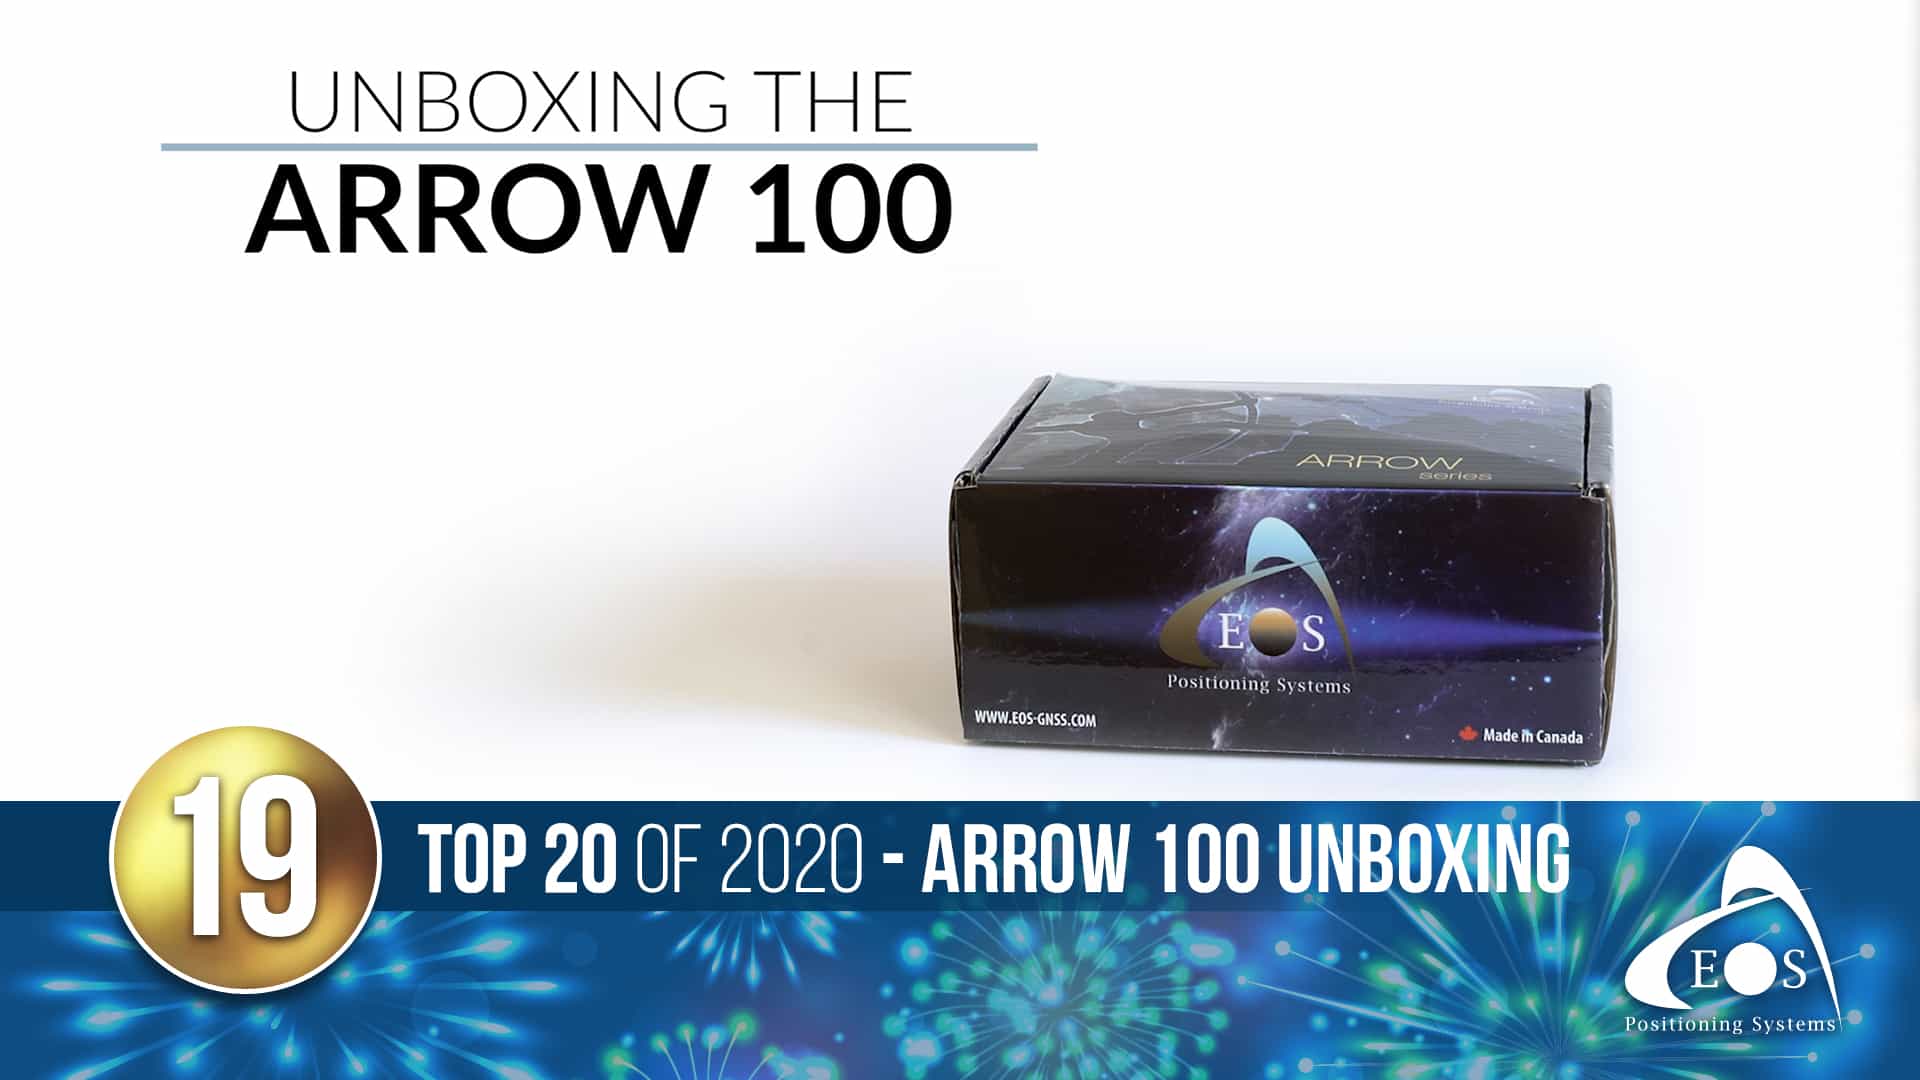 Eos Positioning Systems blog top articles of 2020: 19 - Arrow 100 Unboxing